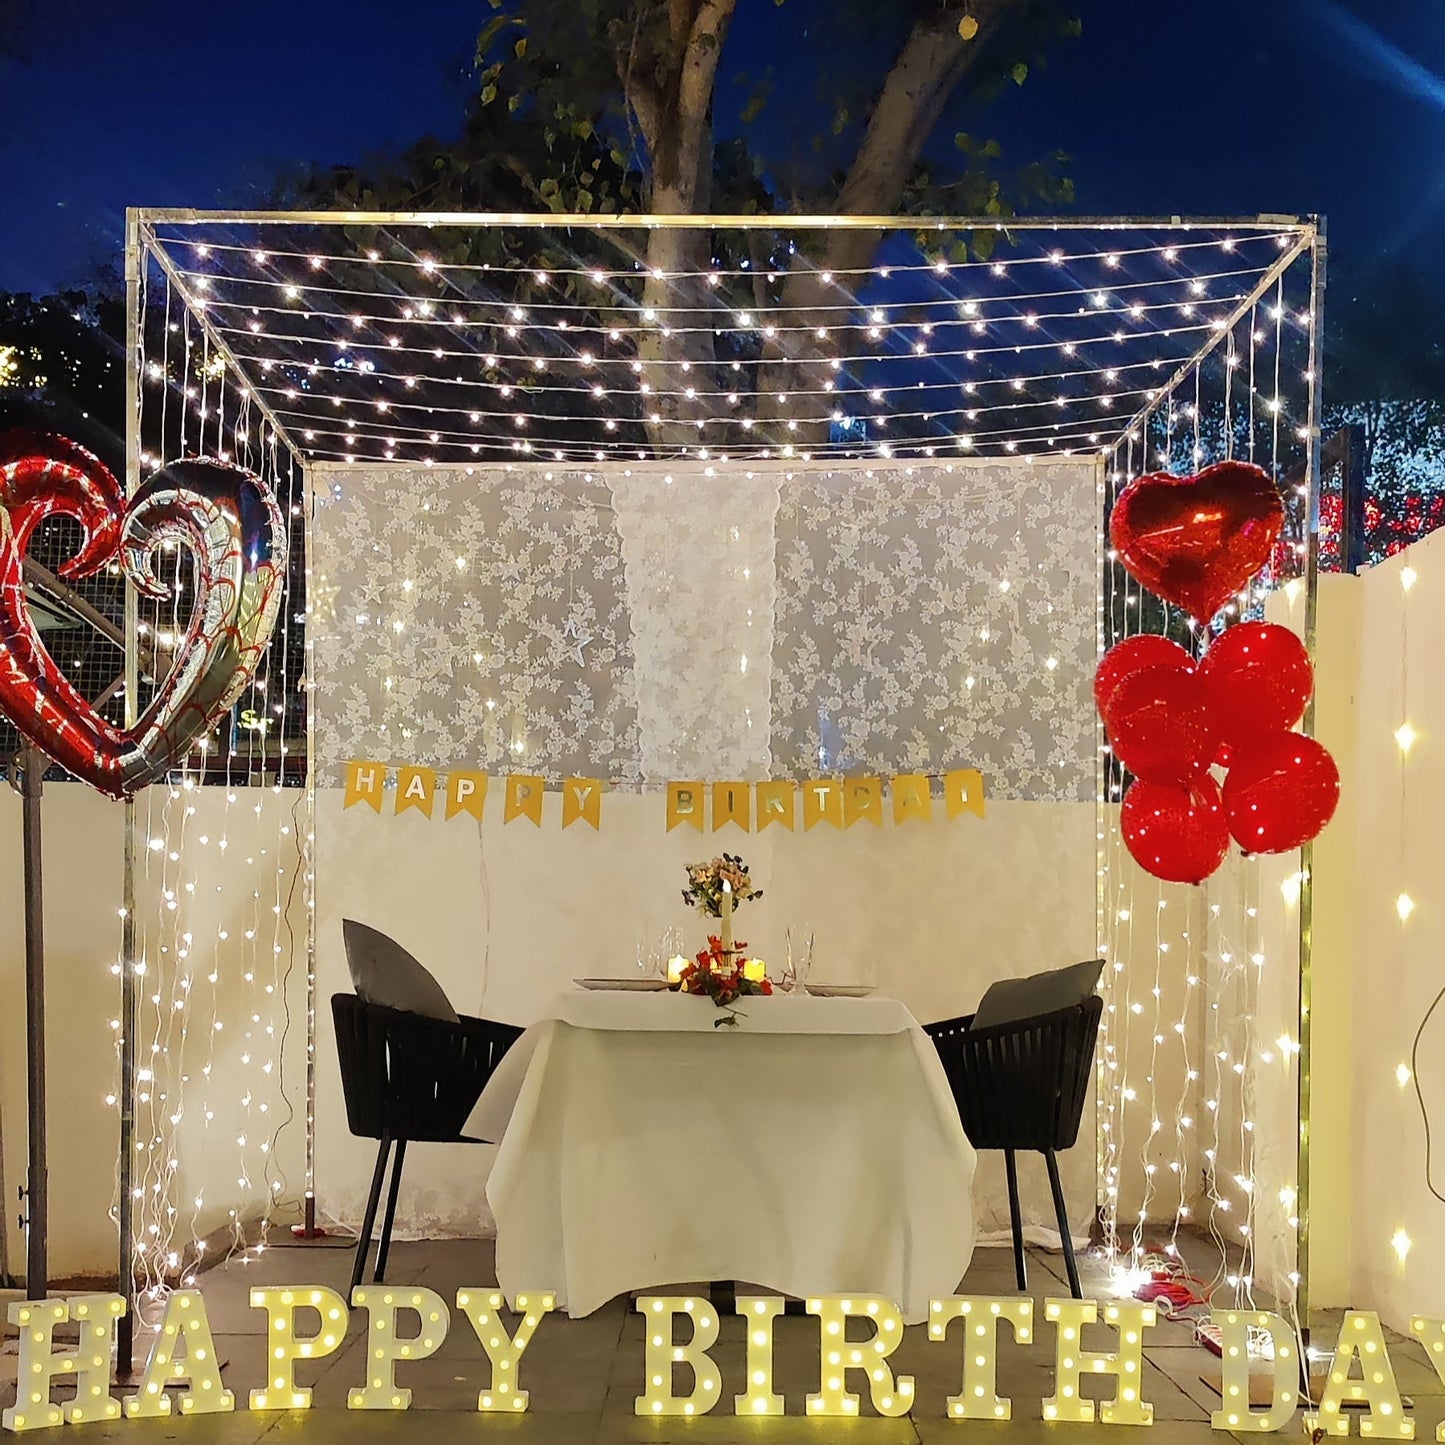 Miraculous Memories Offers Candle Light Dinner in Hyderabad for Couple & Friends